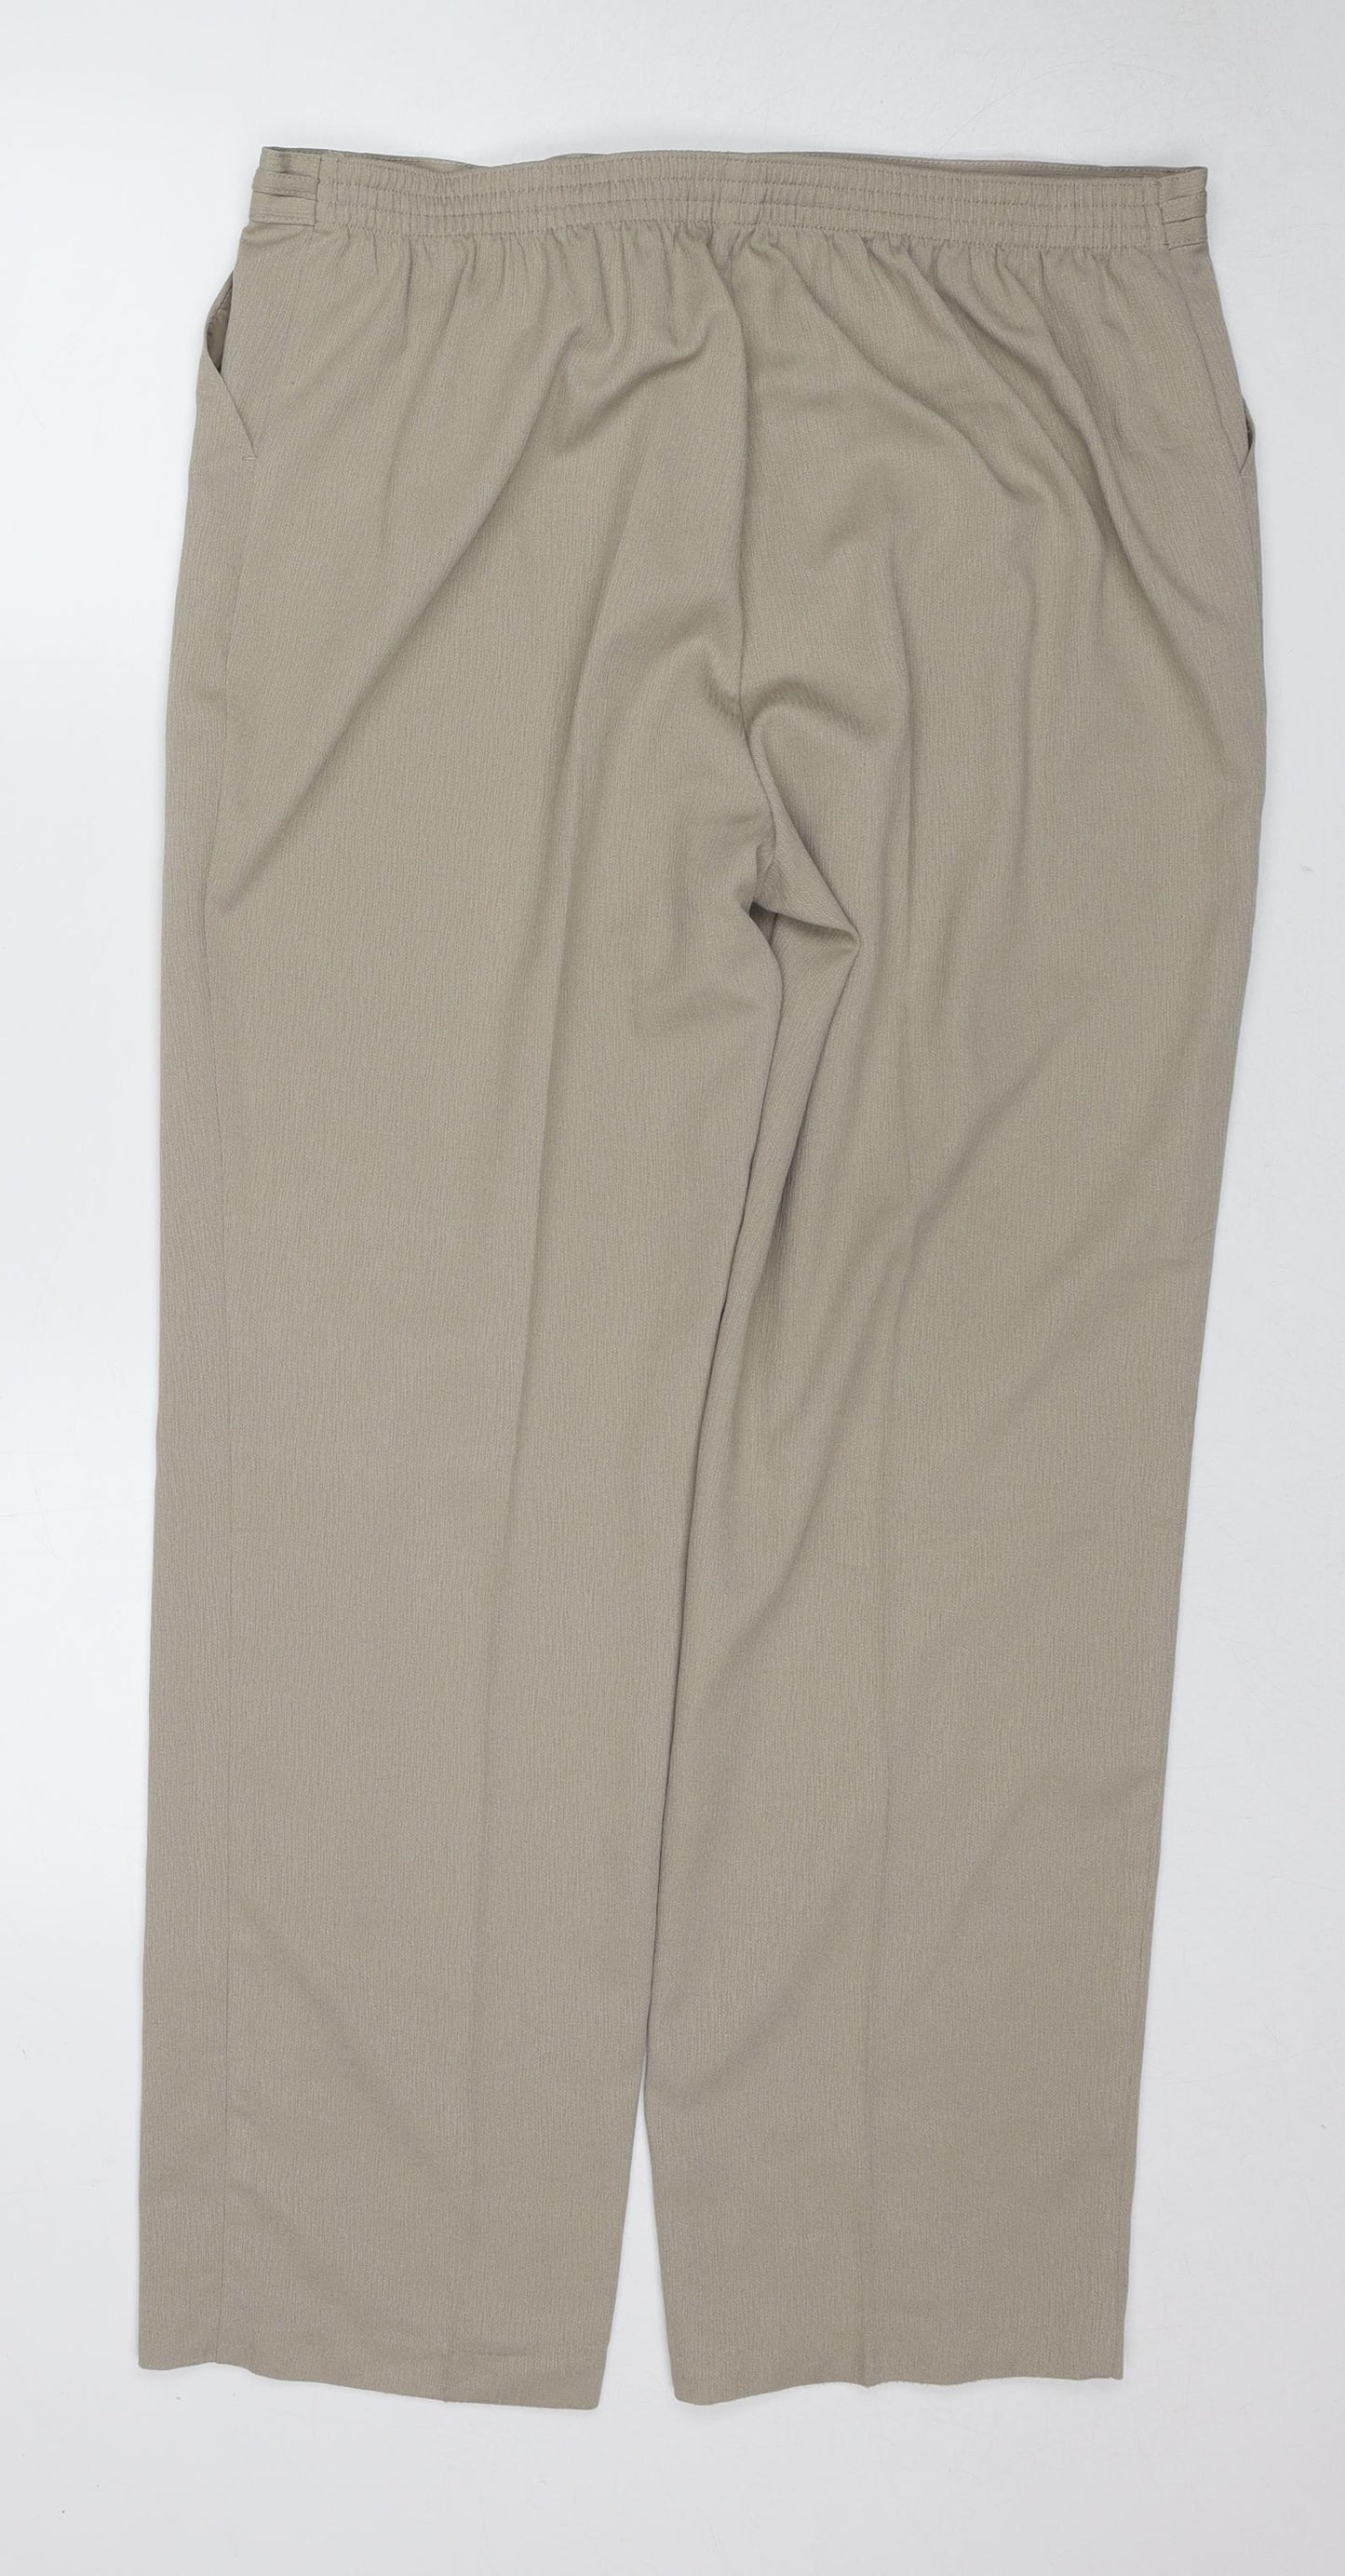 Marks and Spencer Womens Beige Polyester Trousers Size 16 Regular